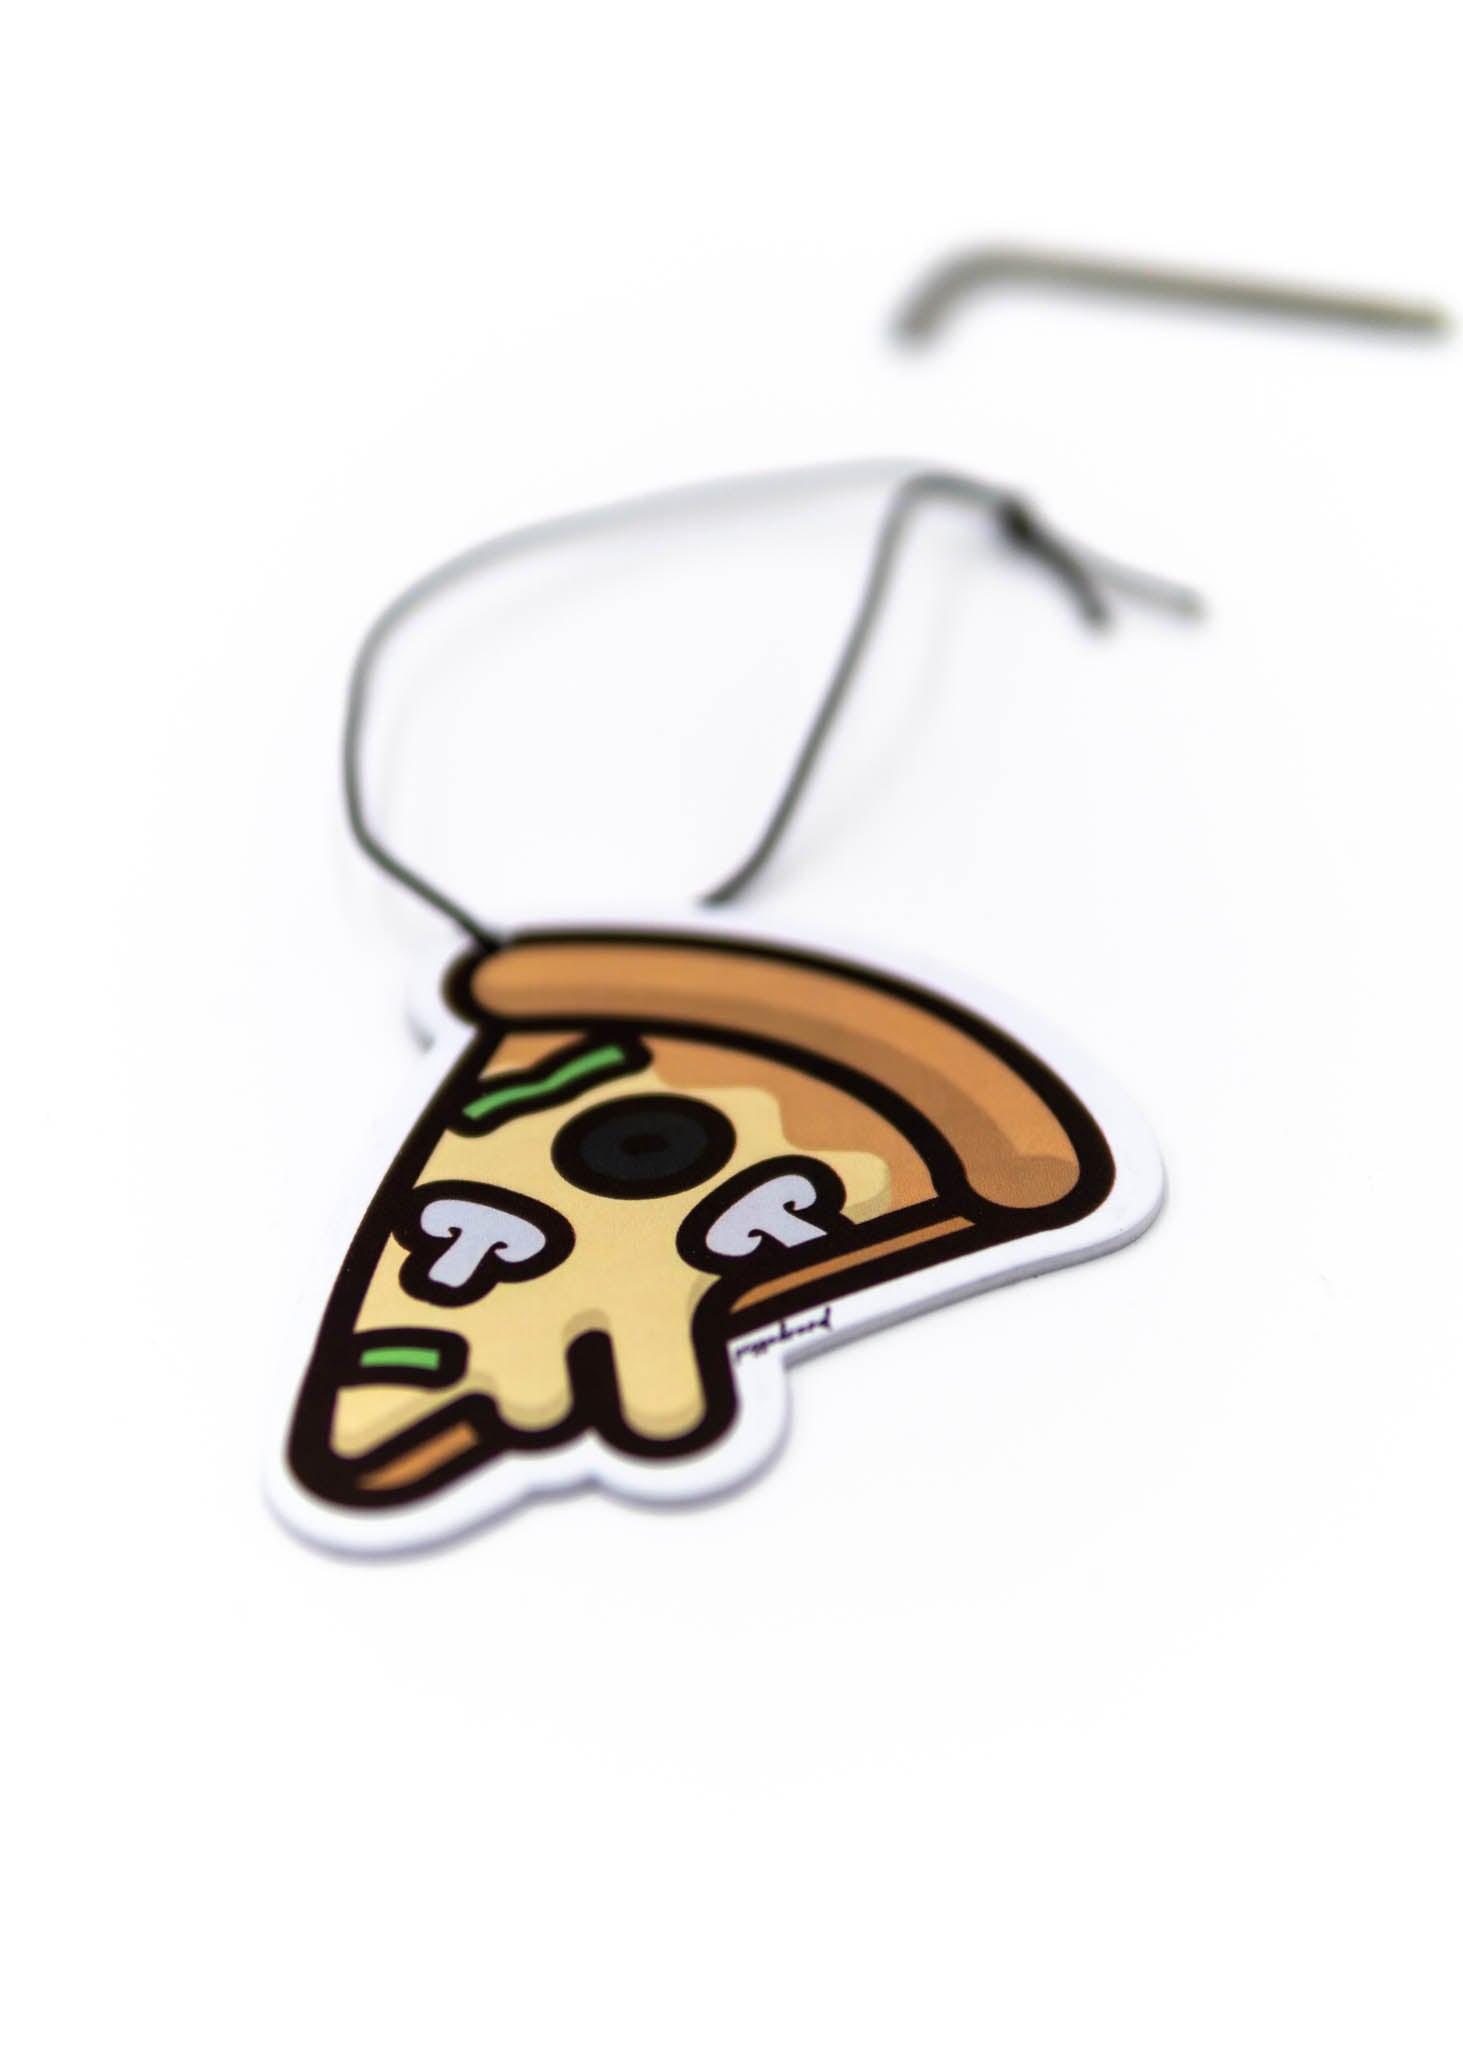 A pizzabrand black olives, mushroom, and green peppers pizza air freshener. Photo is a close up of the car air freshener with string.